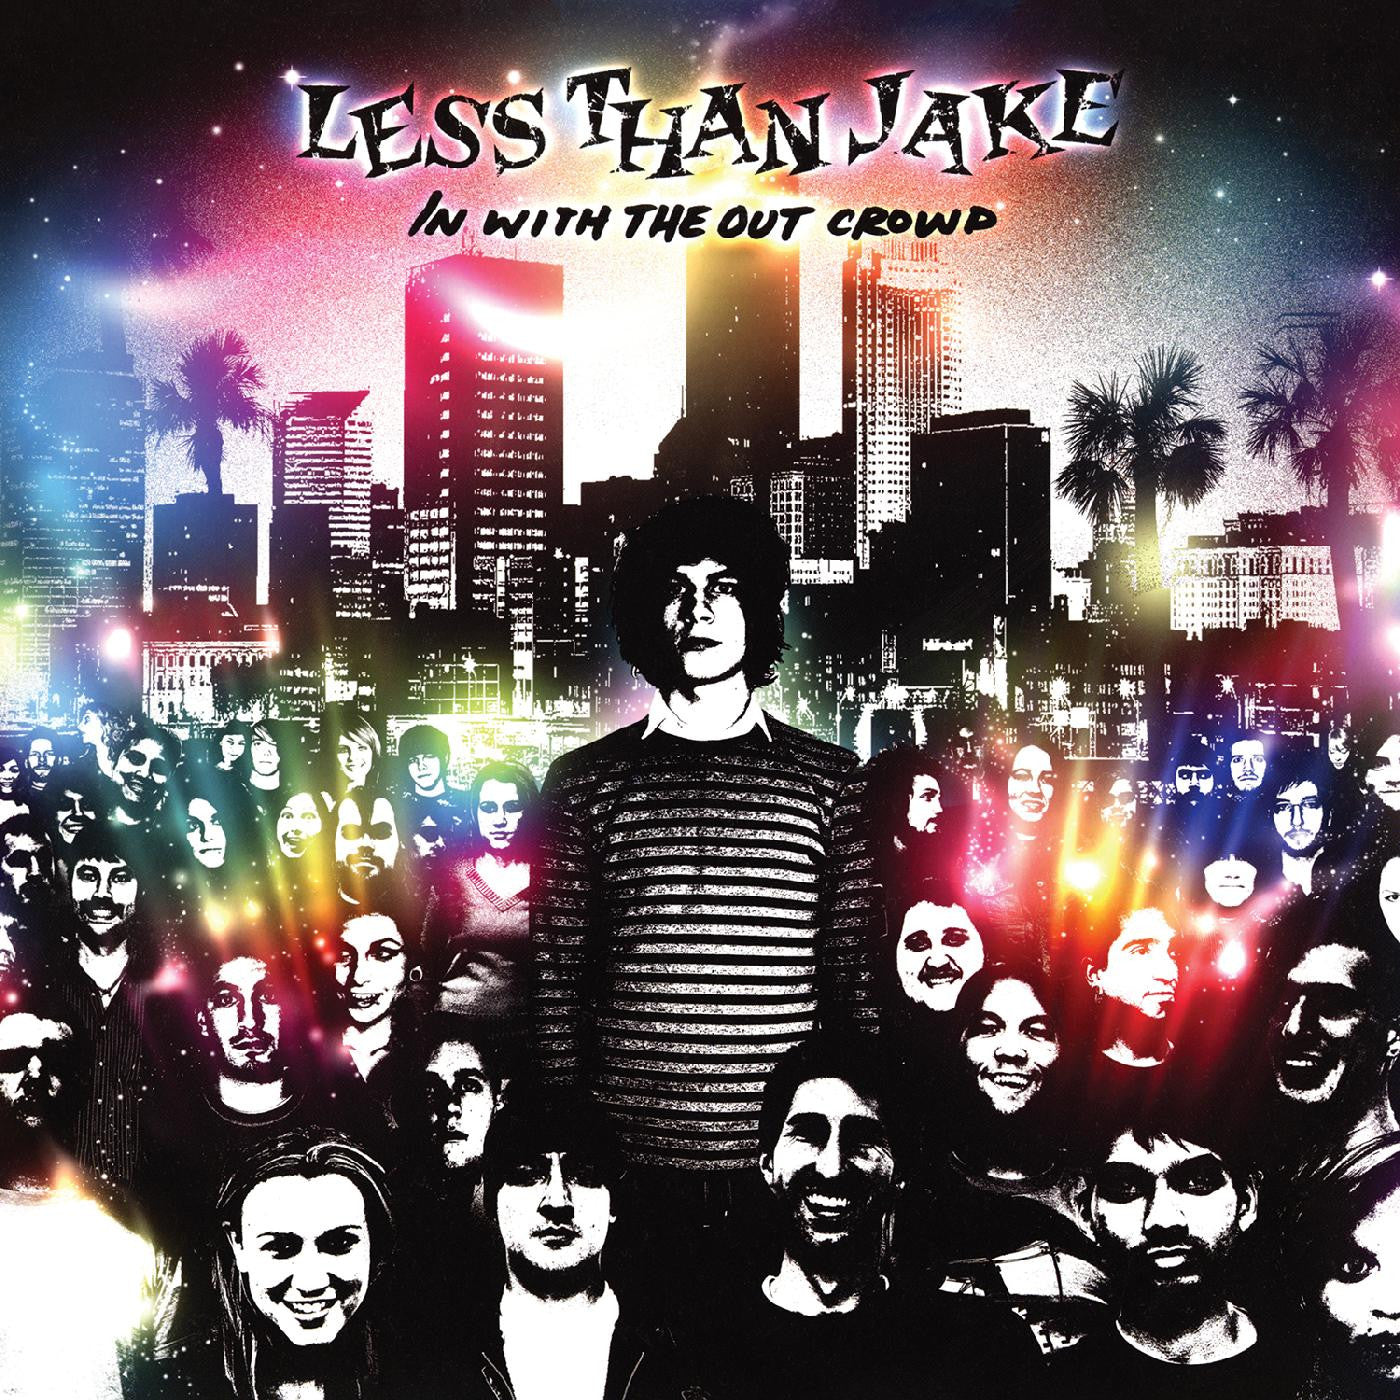 Less Than Jake - In With the Out Crowd (Vinyl LP)